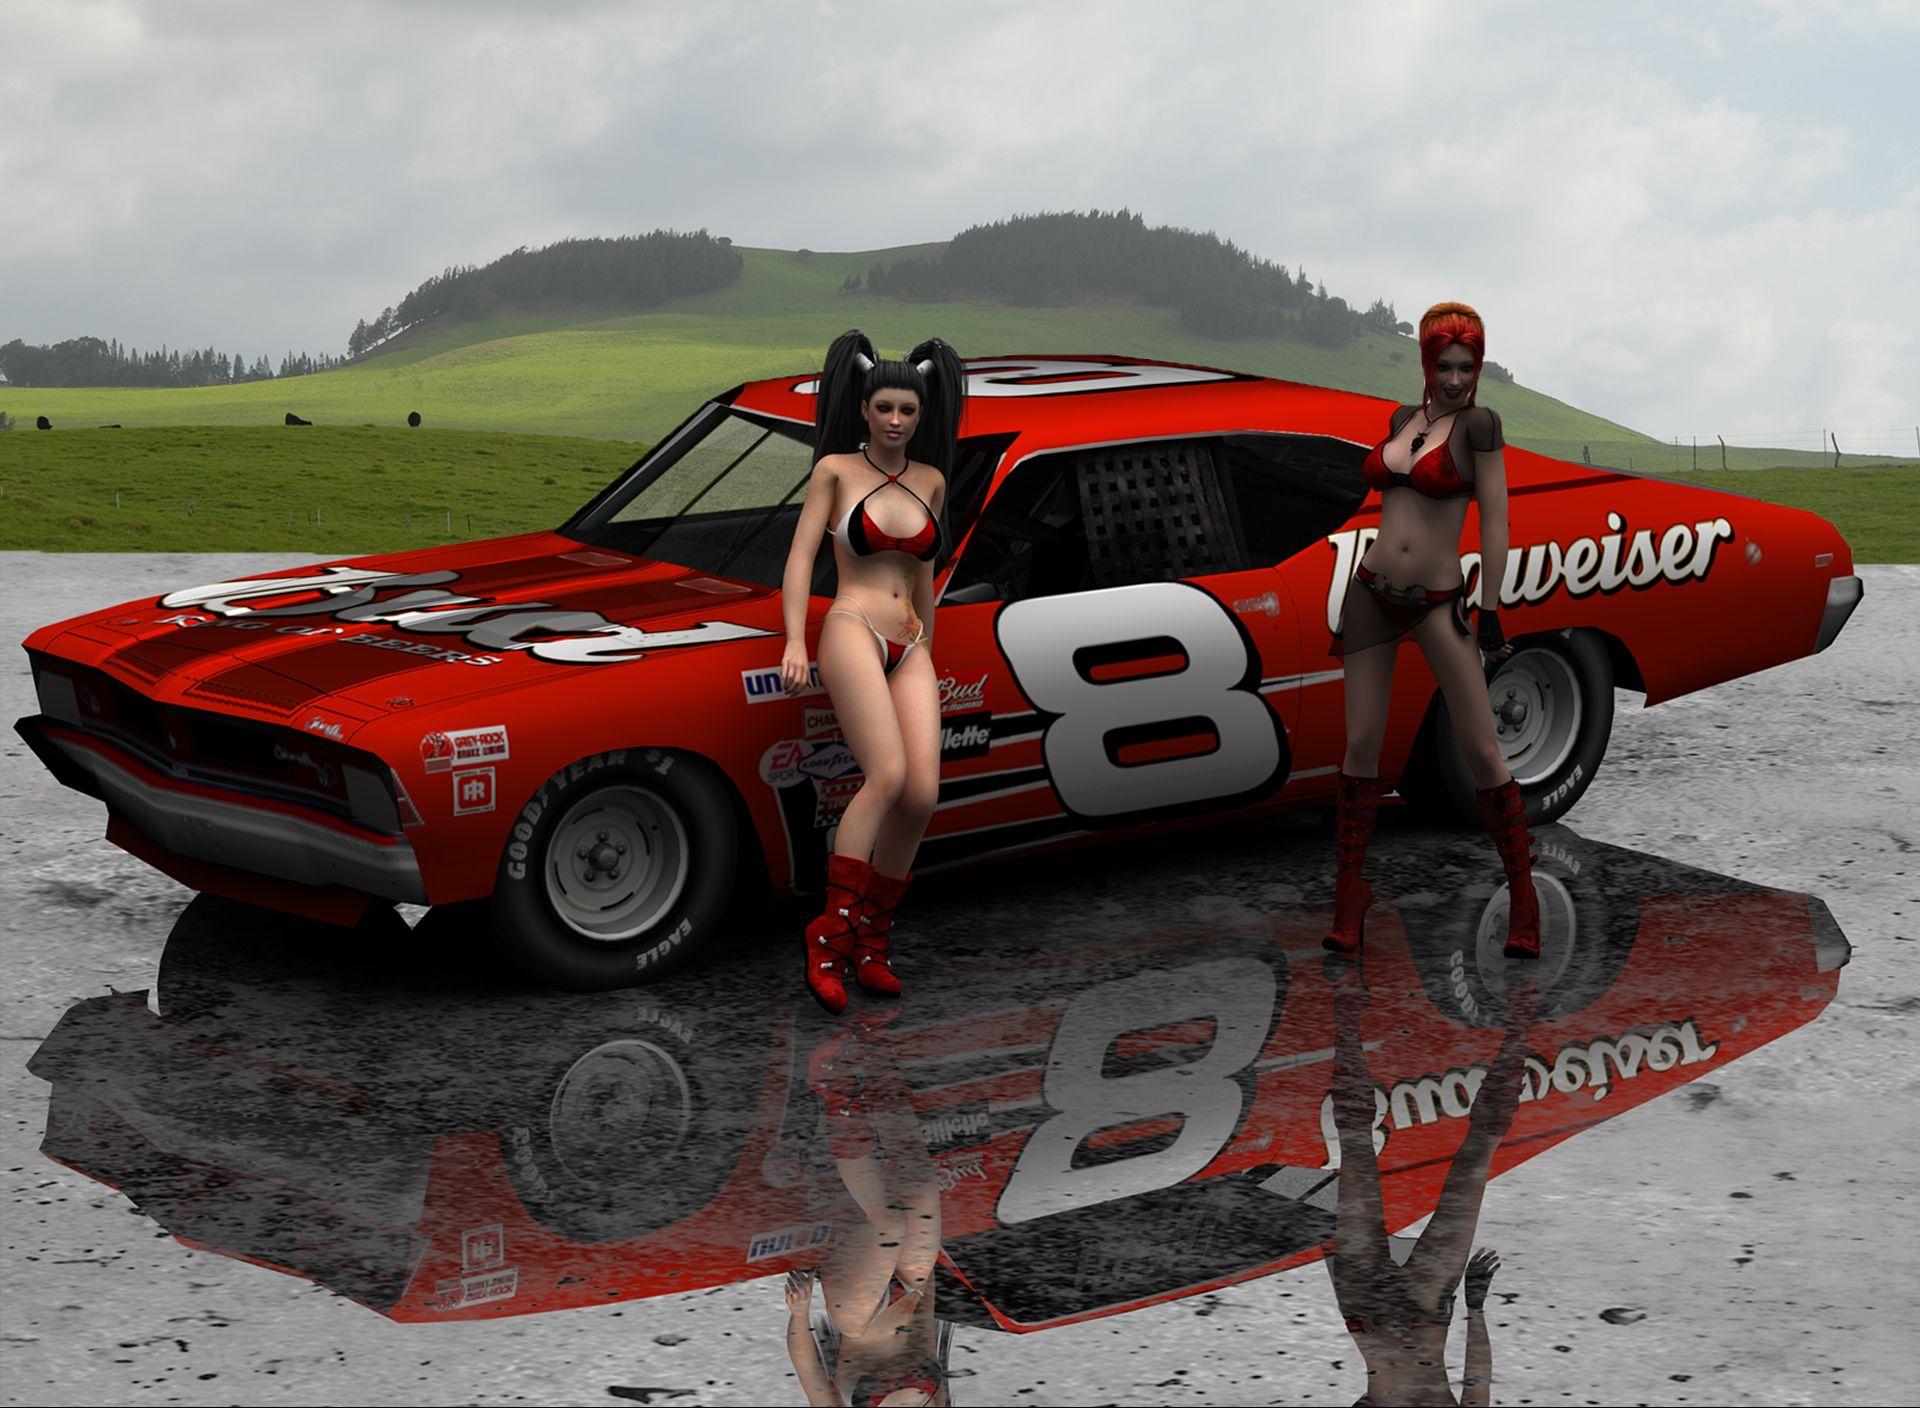 Wallpaper By Wicked Shadows: Dale Earnhardt Jr Chevy Chevelle Wallpaper